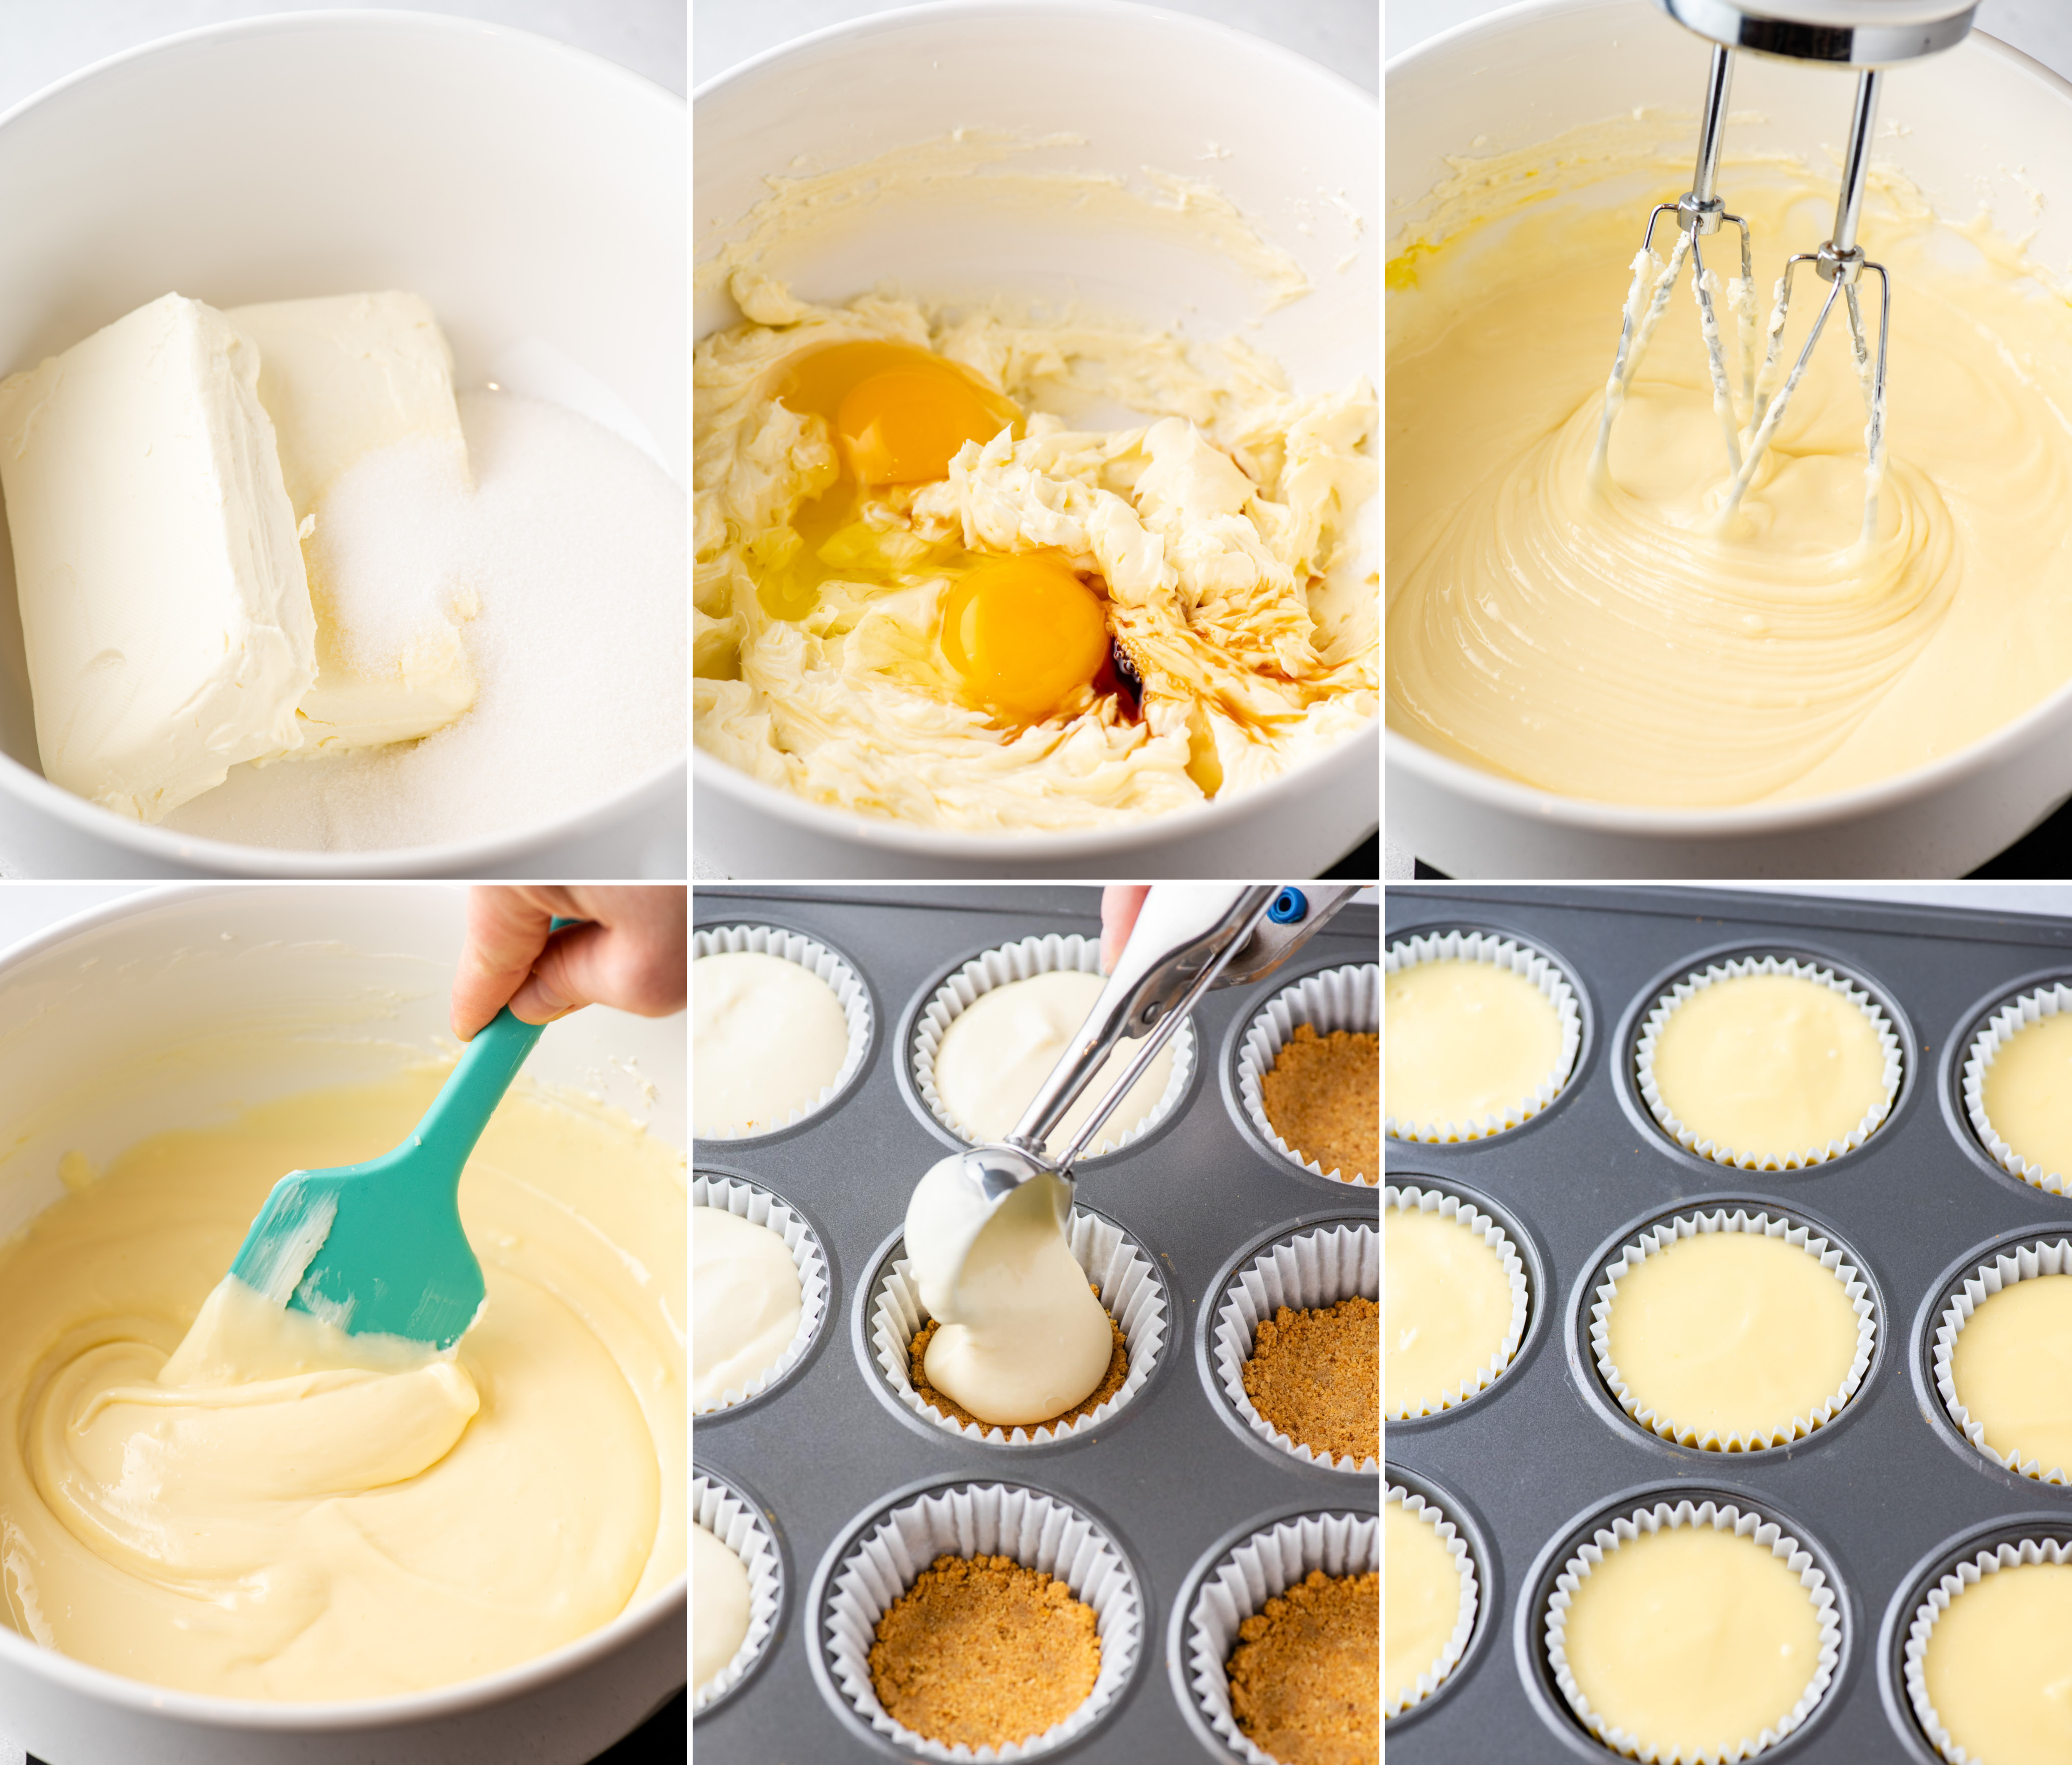 Six photos showing process of making mini cheesecakes